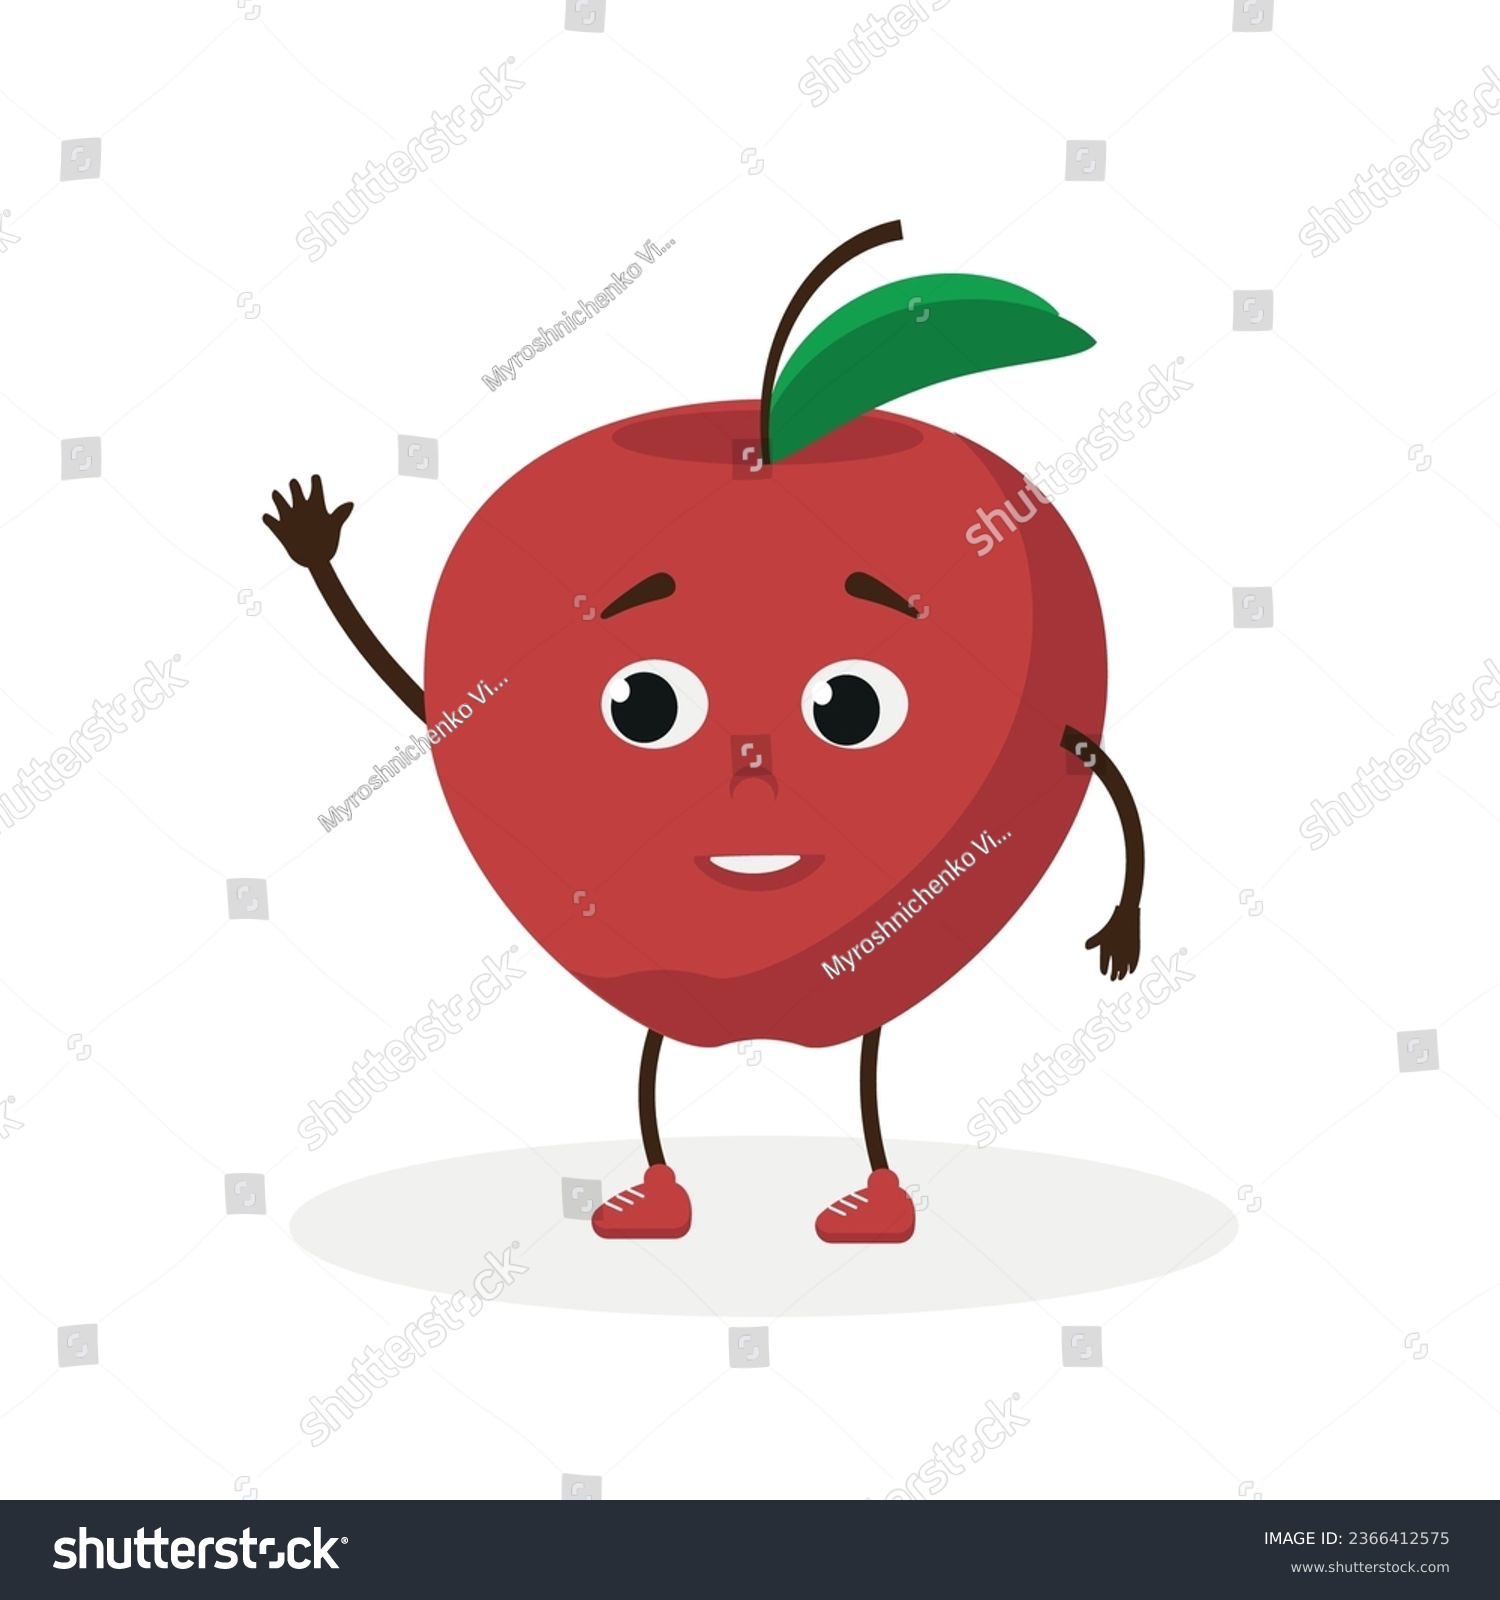 SVG of Vector apple. Cute baby character.Flat illustration. Suitable for animation, using in web, apps, books, education projects. No transparency, solid colors only. Svg, lottie without bags. svg